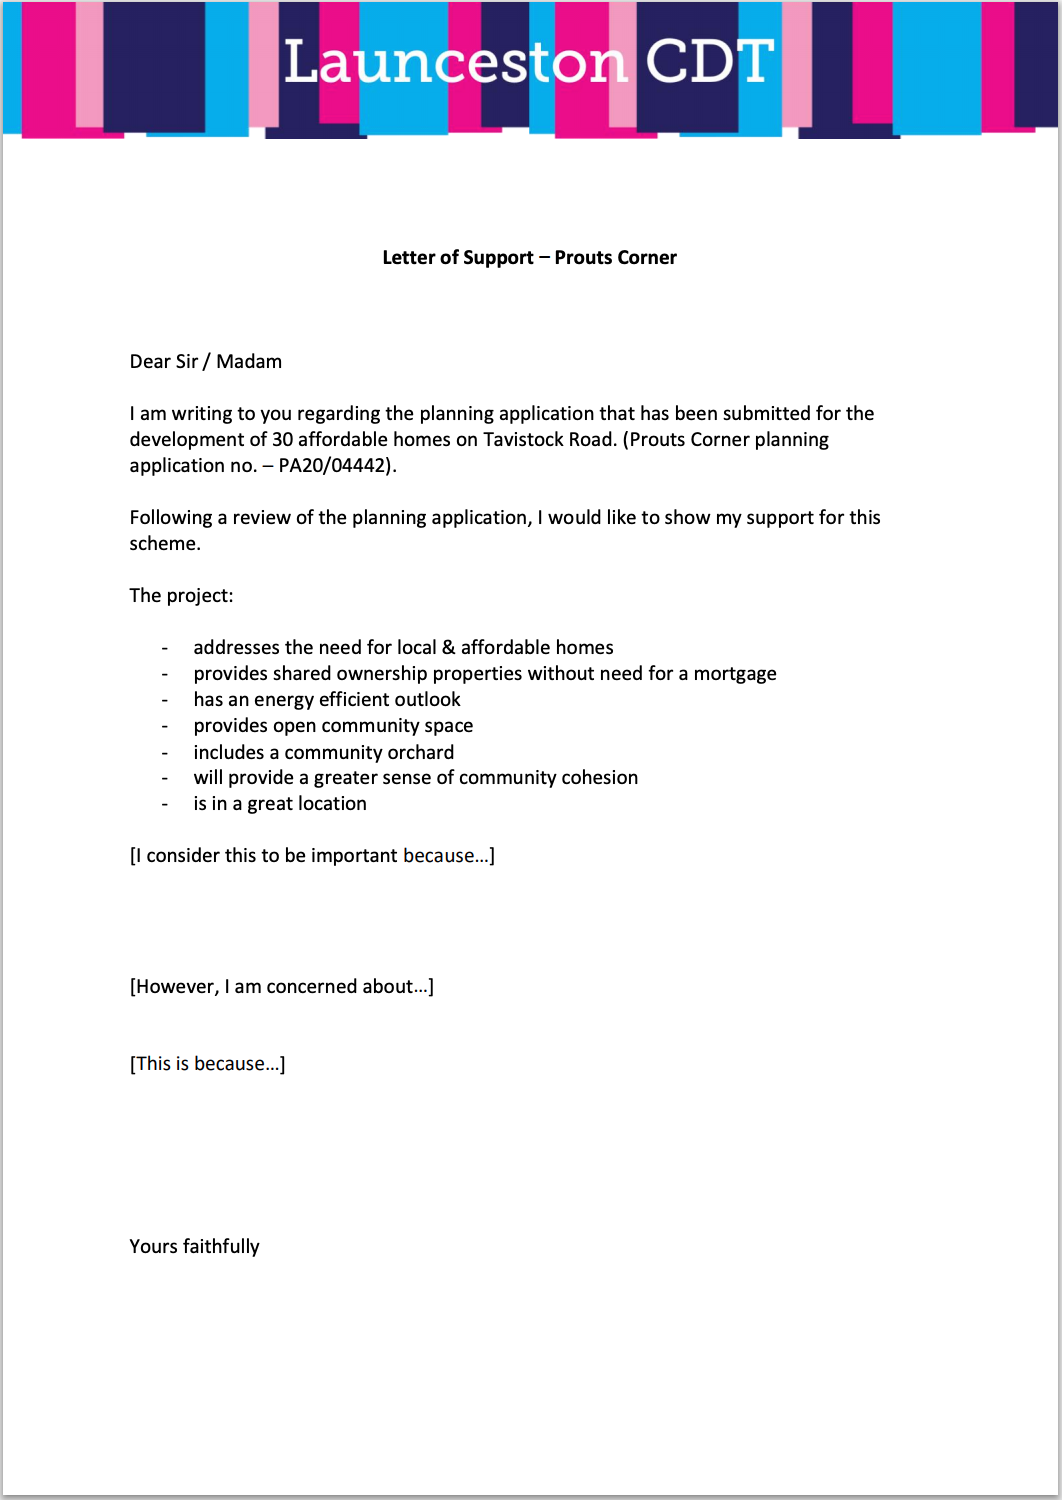 Letter Of Support Template from launcestoncdt.co.uk